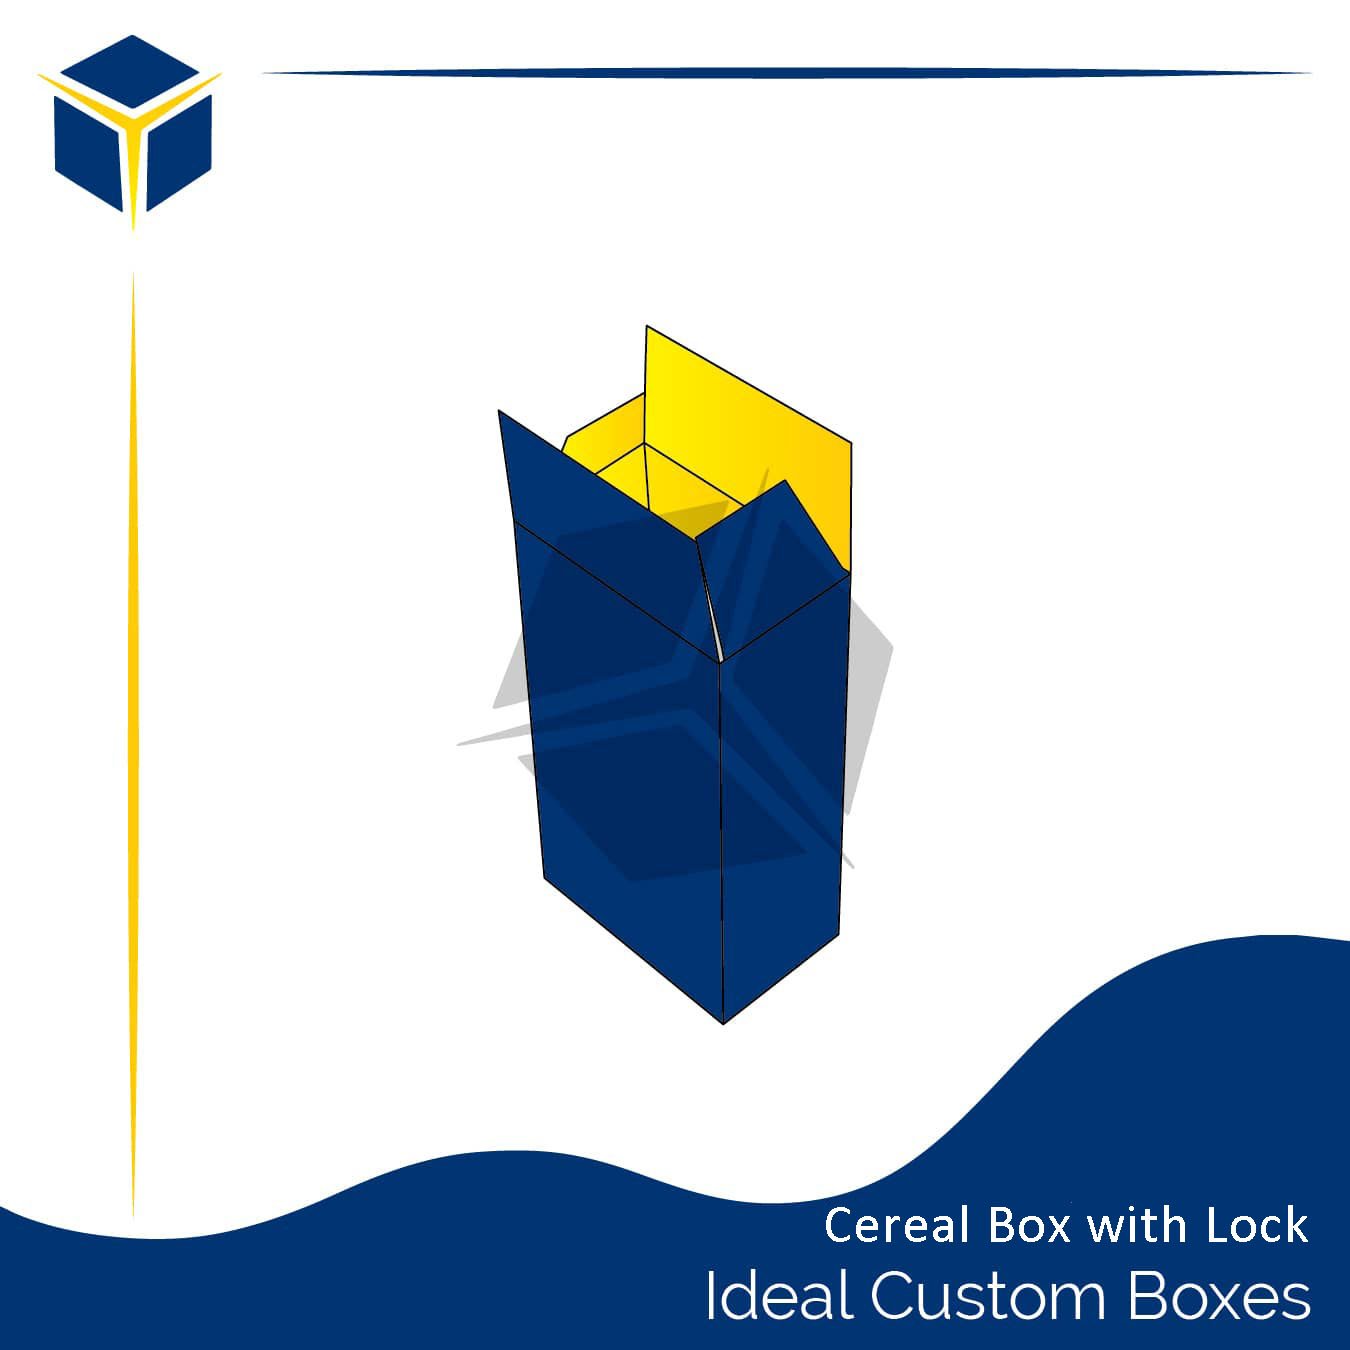 Cereal Box with Lock